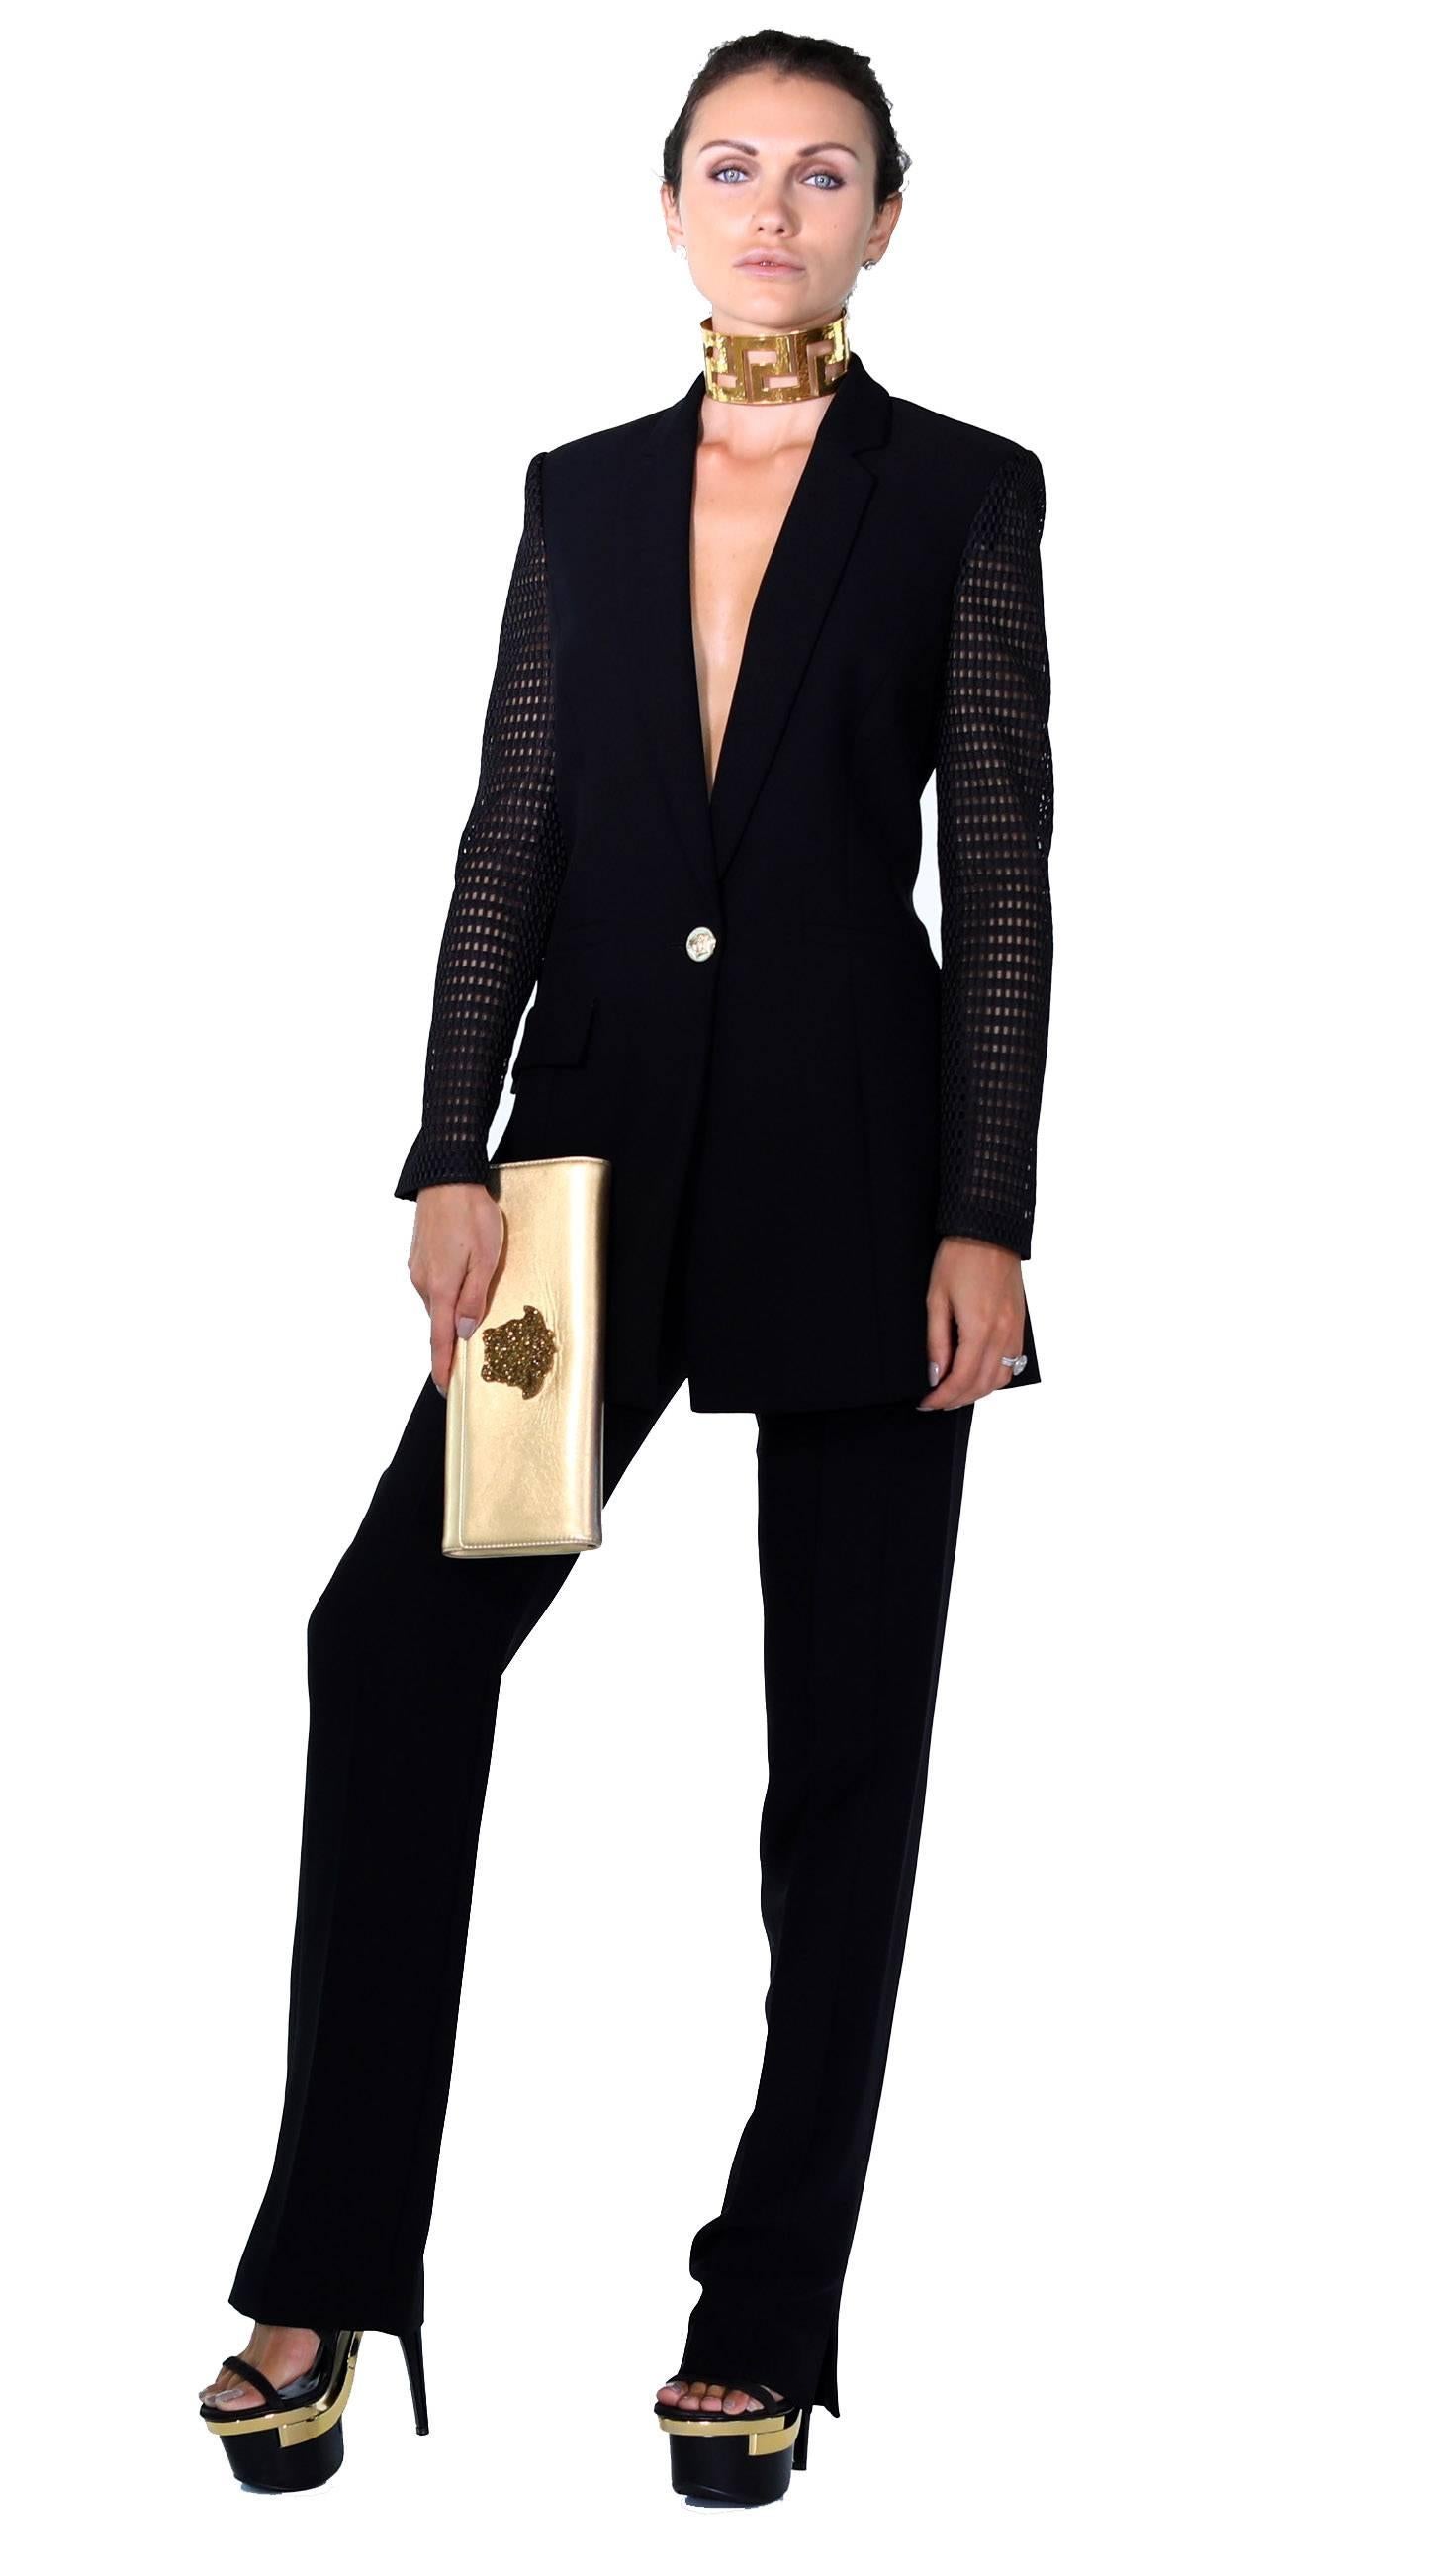 Brand New 

VERSACE

Pant Suit

Detailed with perforated sleeves

IT Size 38 - US 2

100% Silk

New, with tags. 

Comes with Versace hanger and Versace travel garment bag.